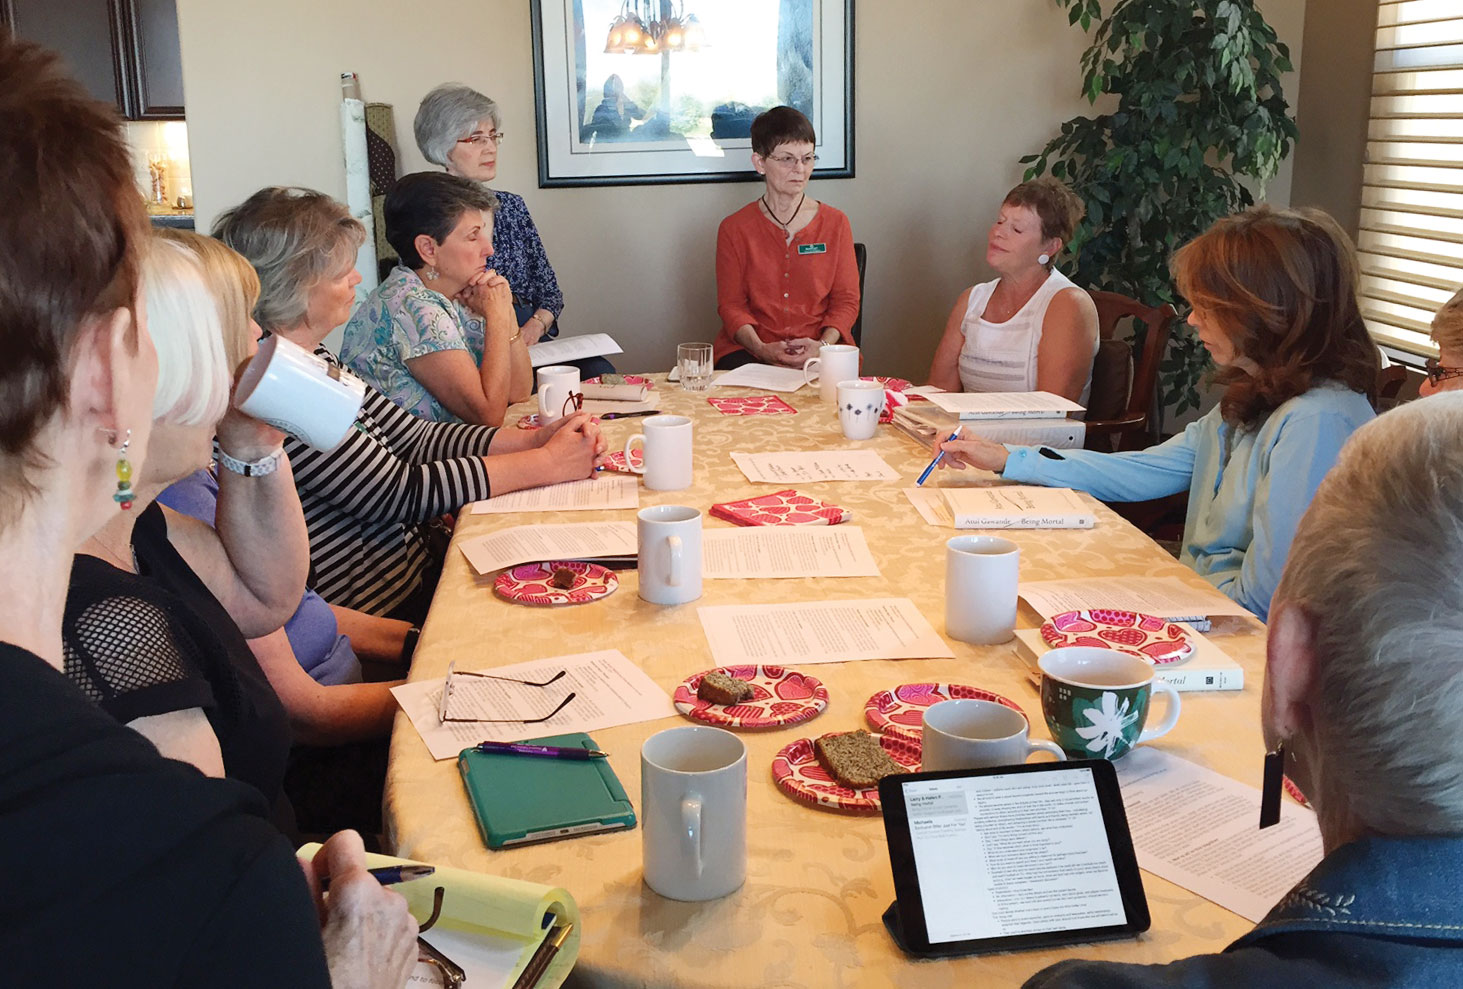 Nurses Group meets to discuss the medical points on a book study of Being Mortal by Atul Gawande.